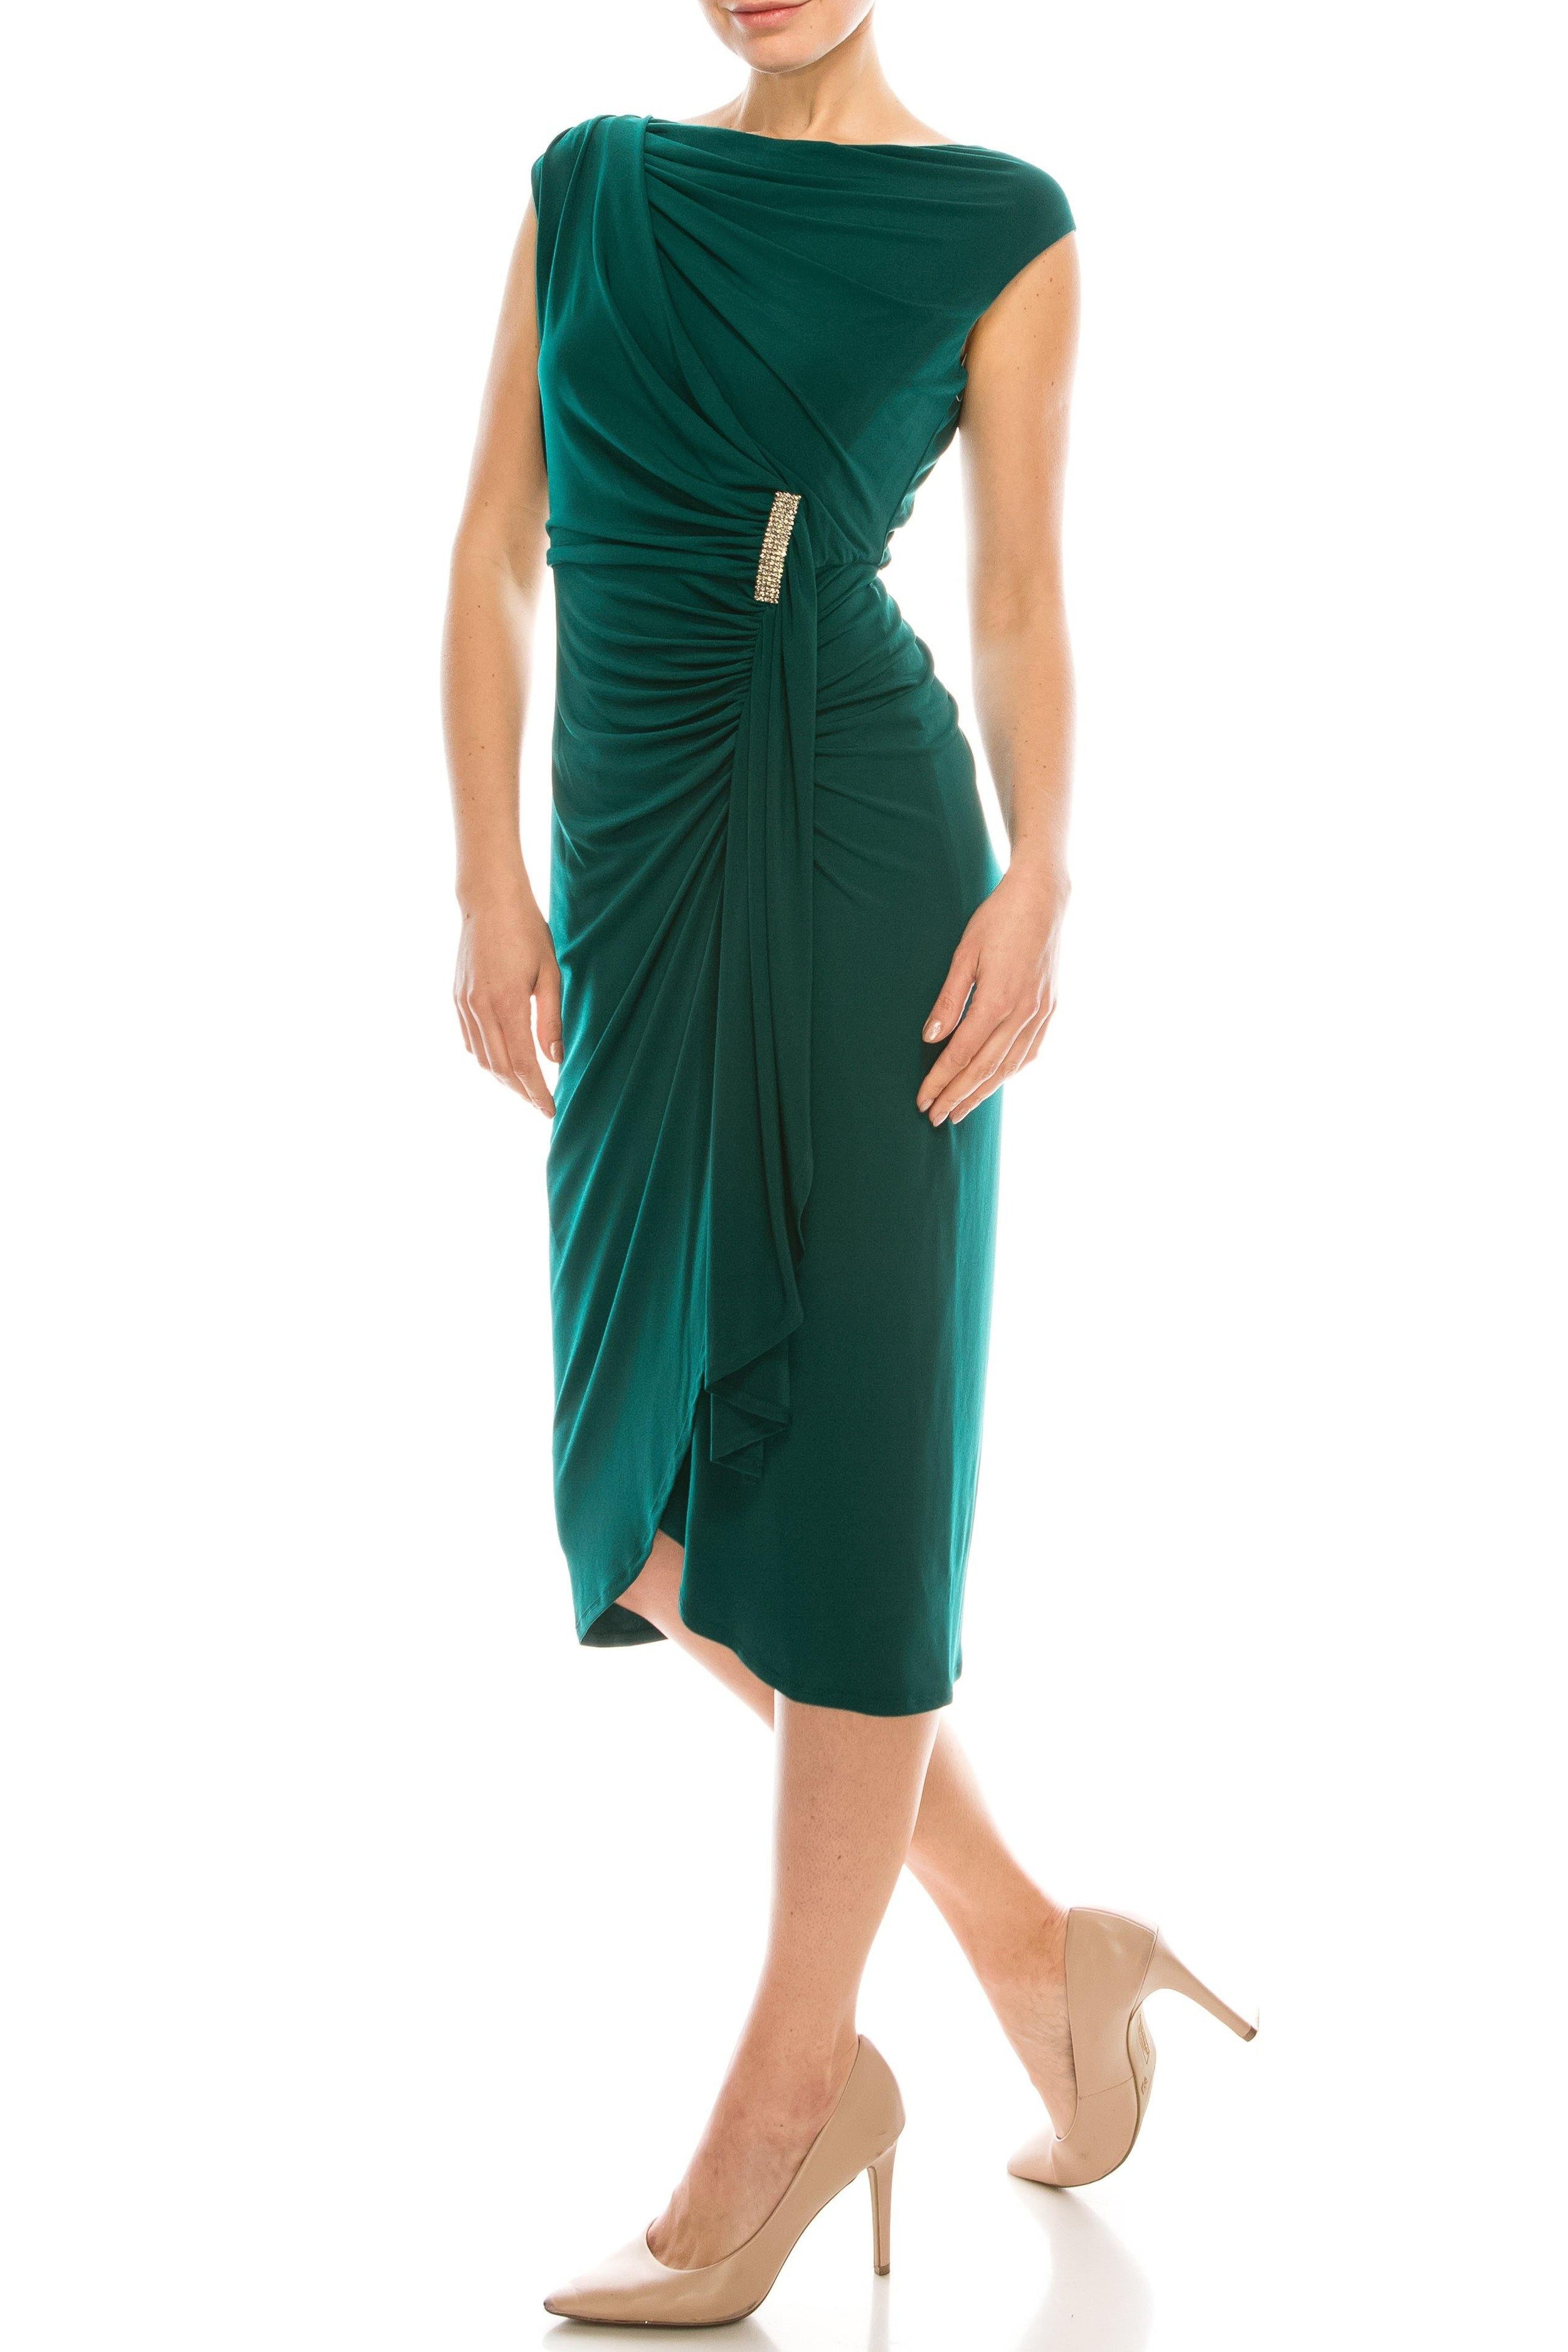 London Times Short Cocktail Ruched Sheath Dress - The Dress Outlet